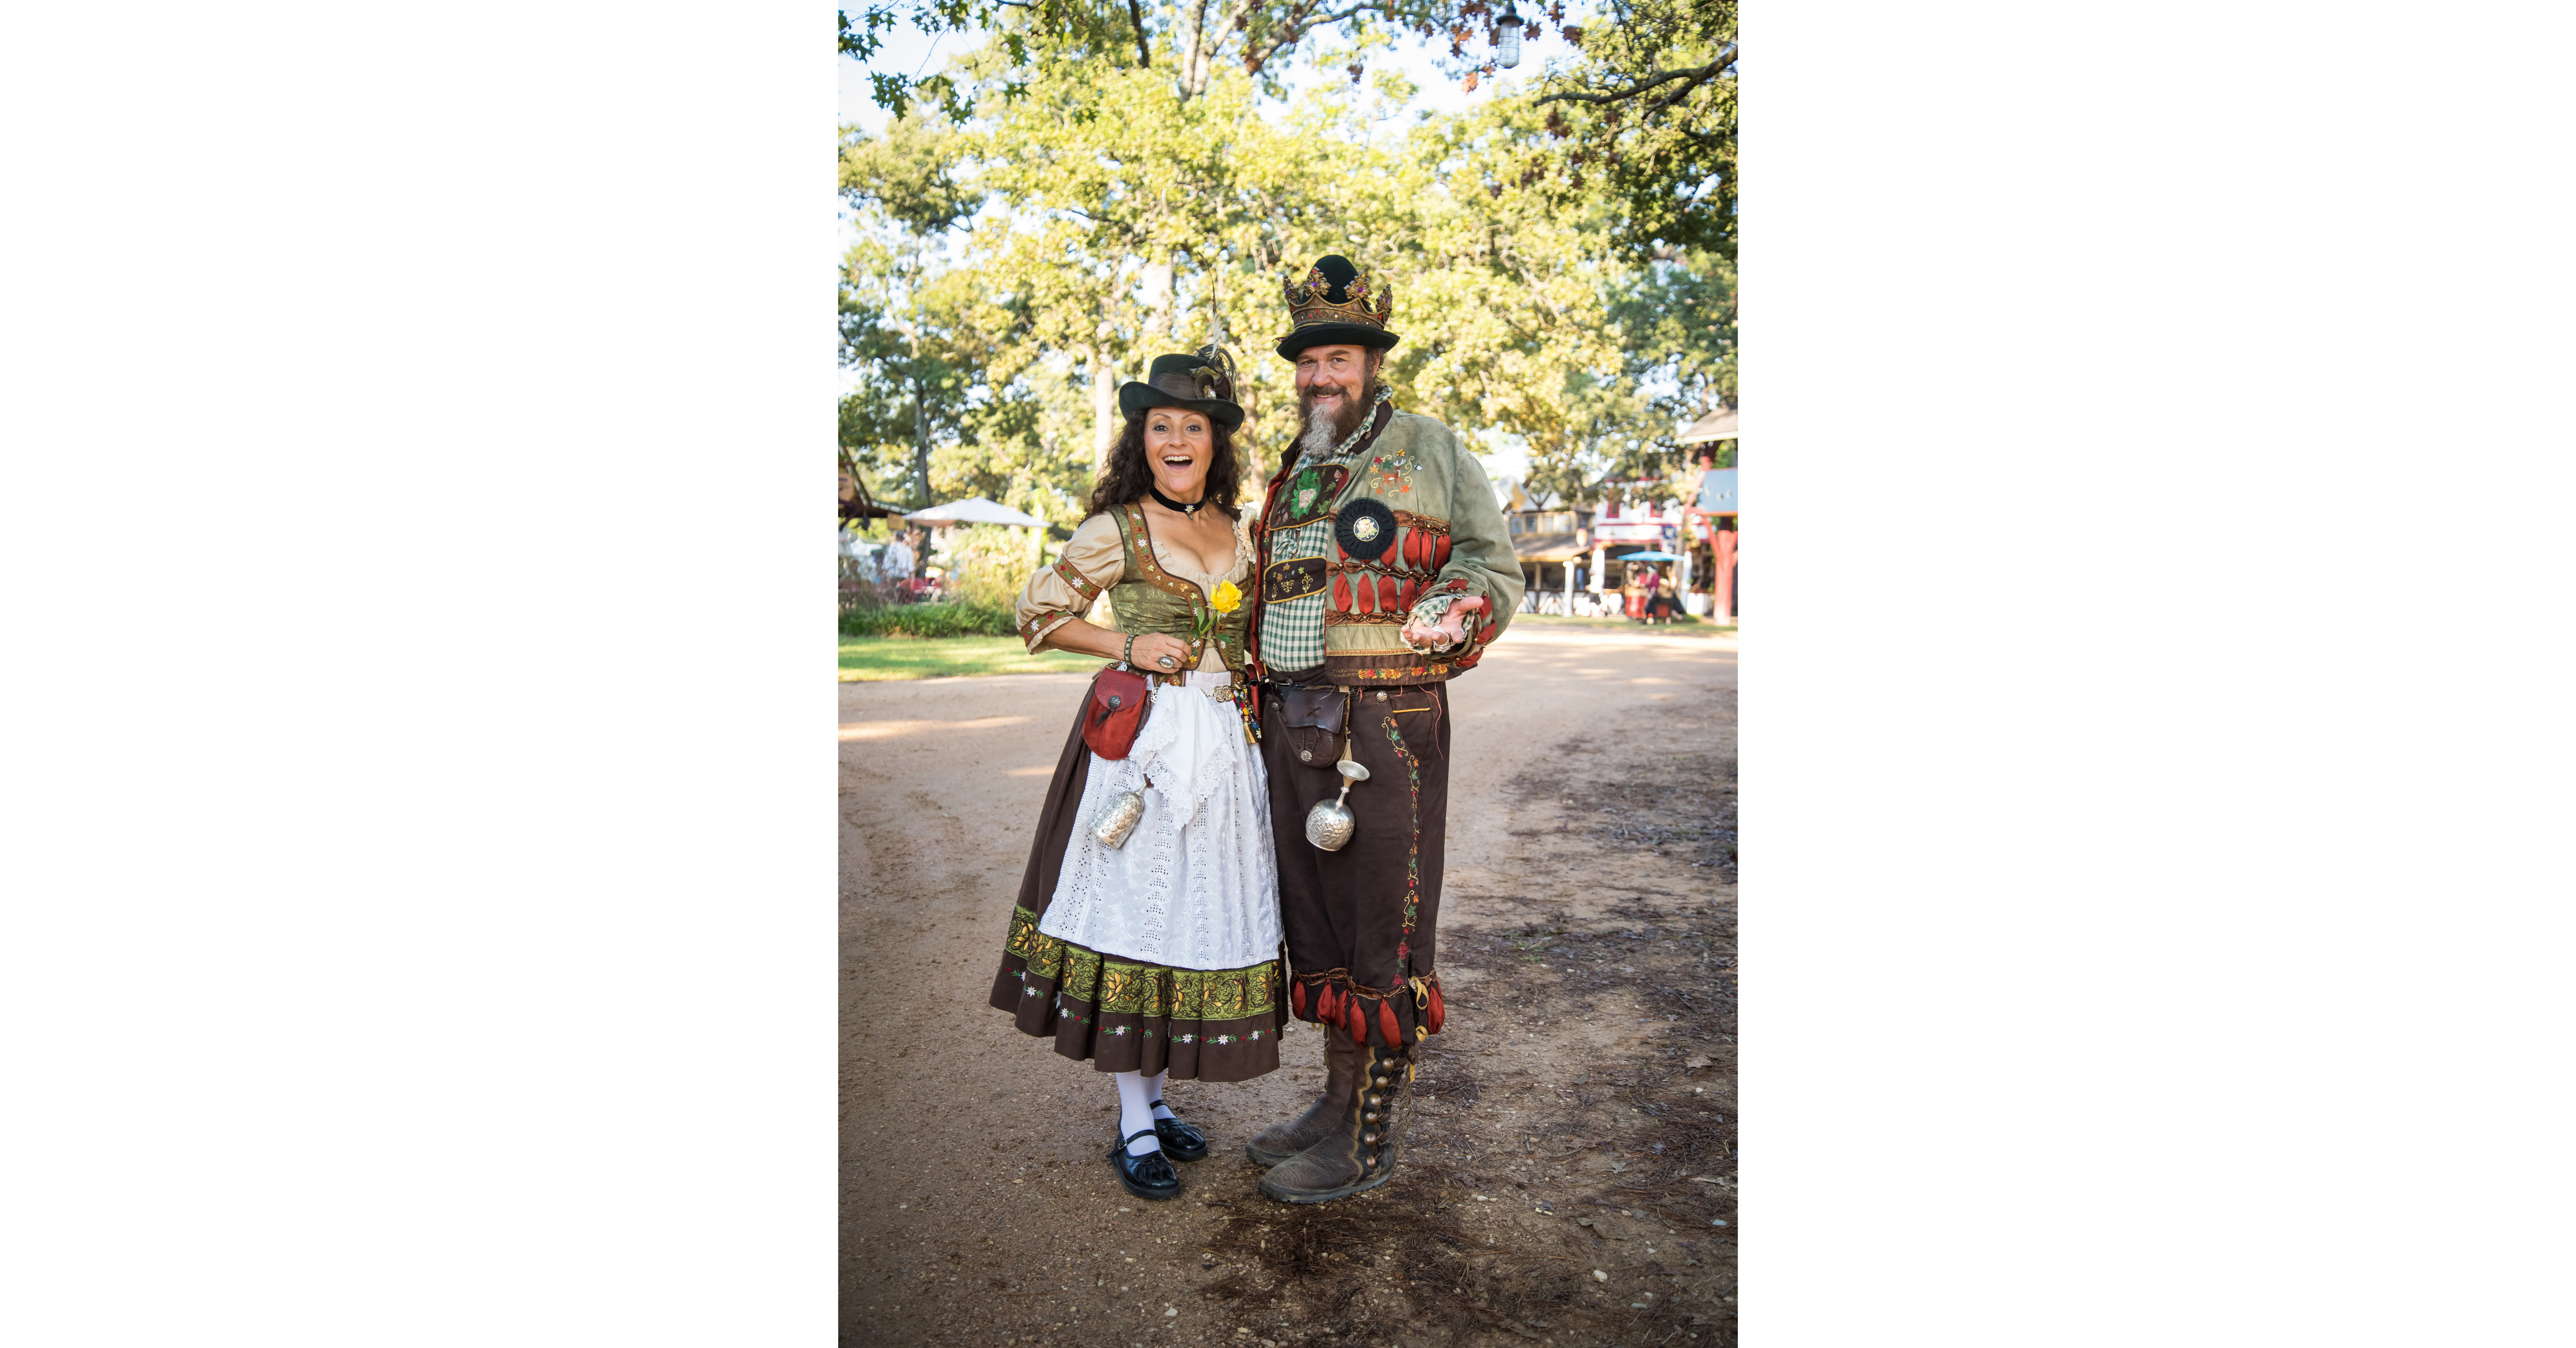  Texas Renaissance Festival Opens this Saturday and Sunday with Oktoberfest 